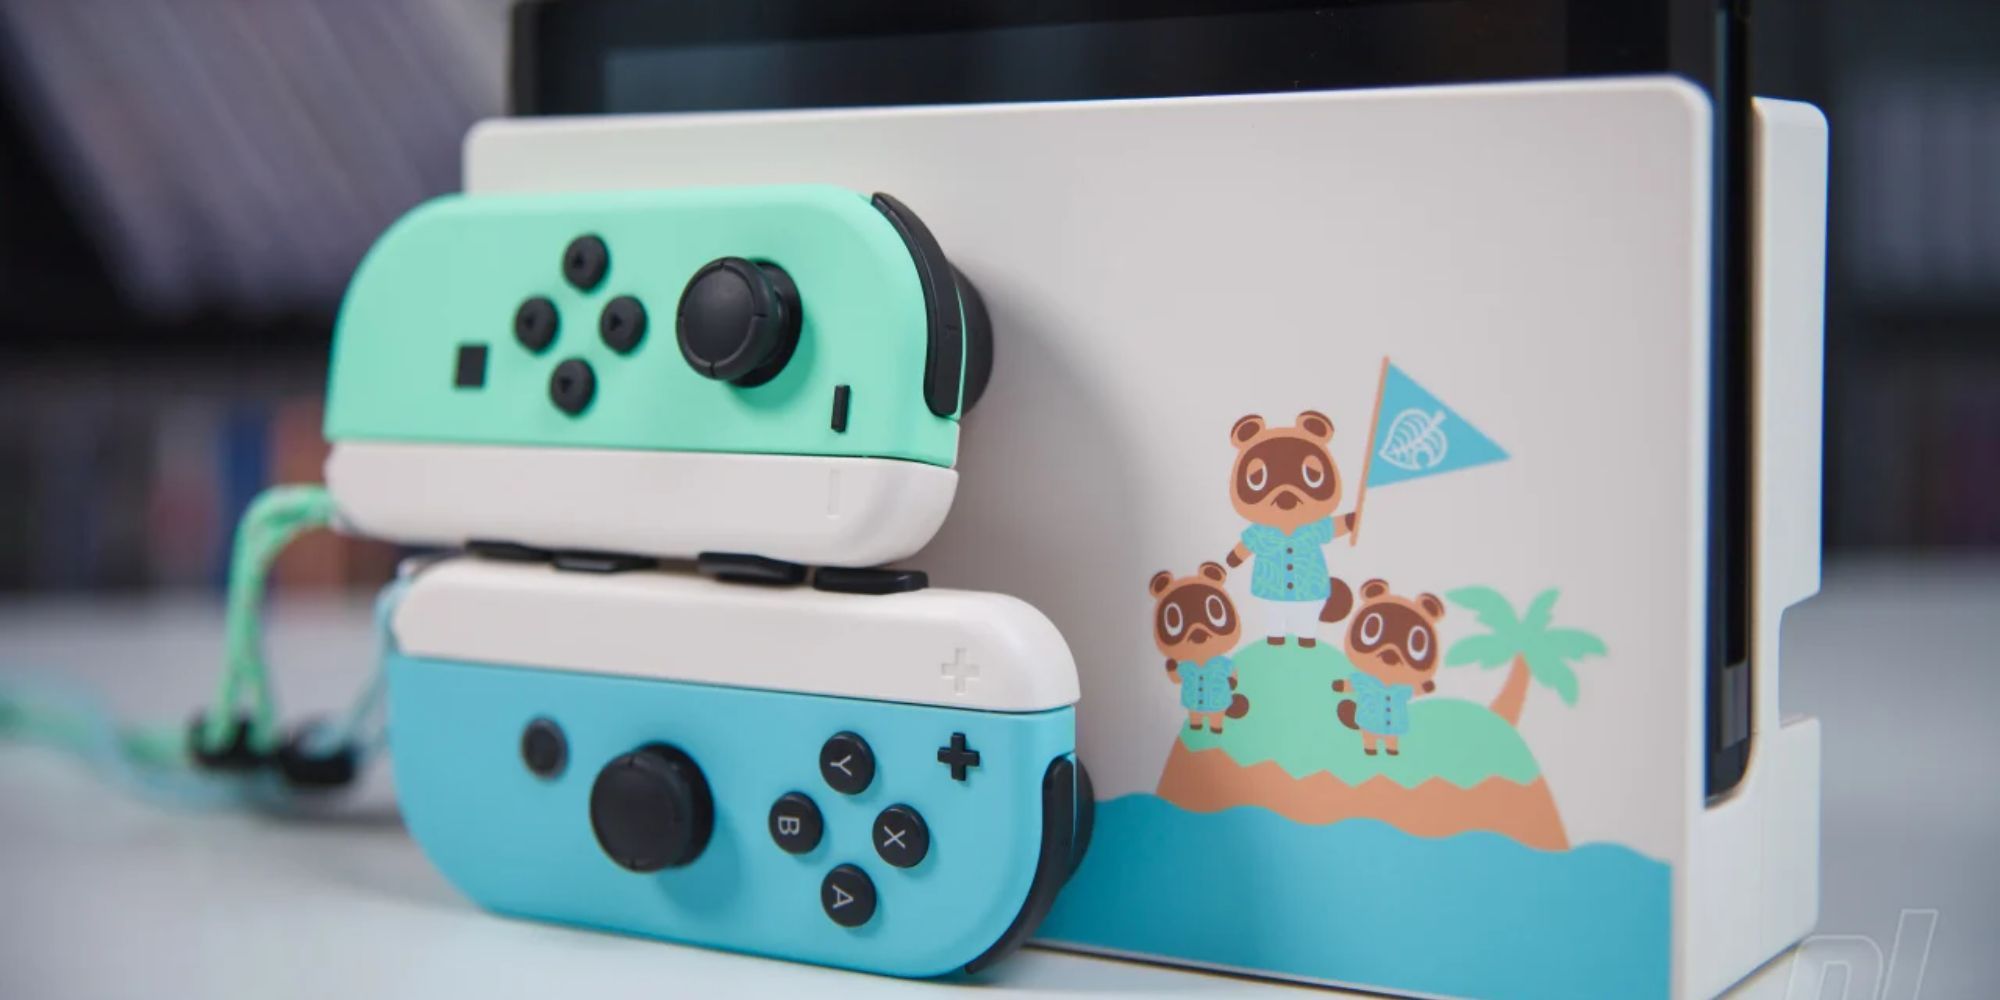 Pastel green and blue Joy Cons with a dock featuring Tom Nook, Timmy and Tommy on the Animal Crossing New Horizons Nintendo Switch